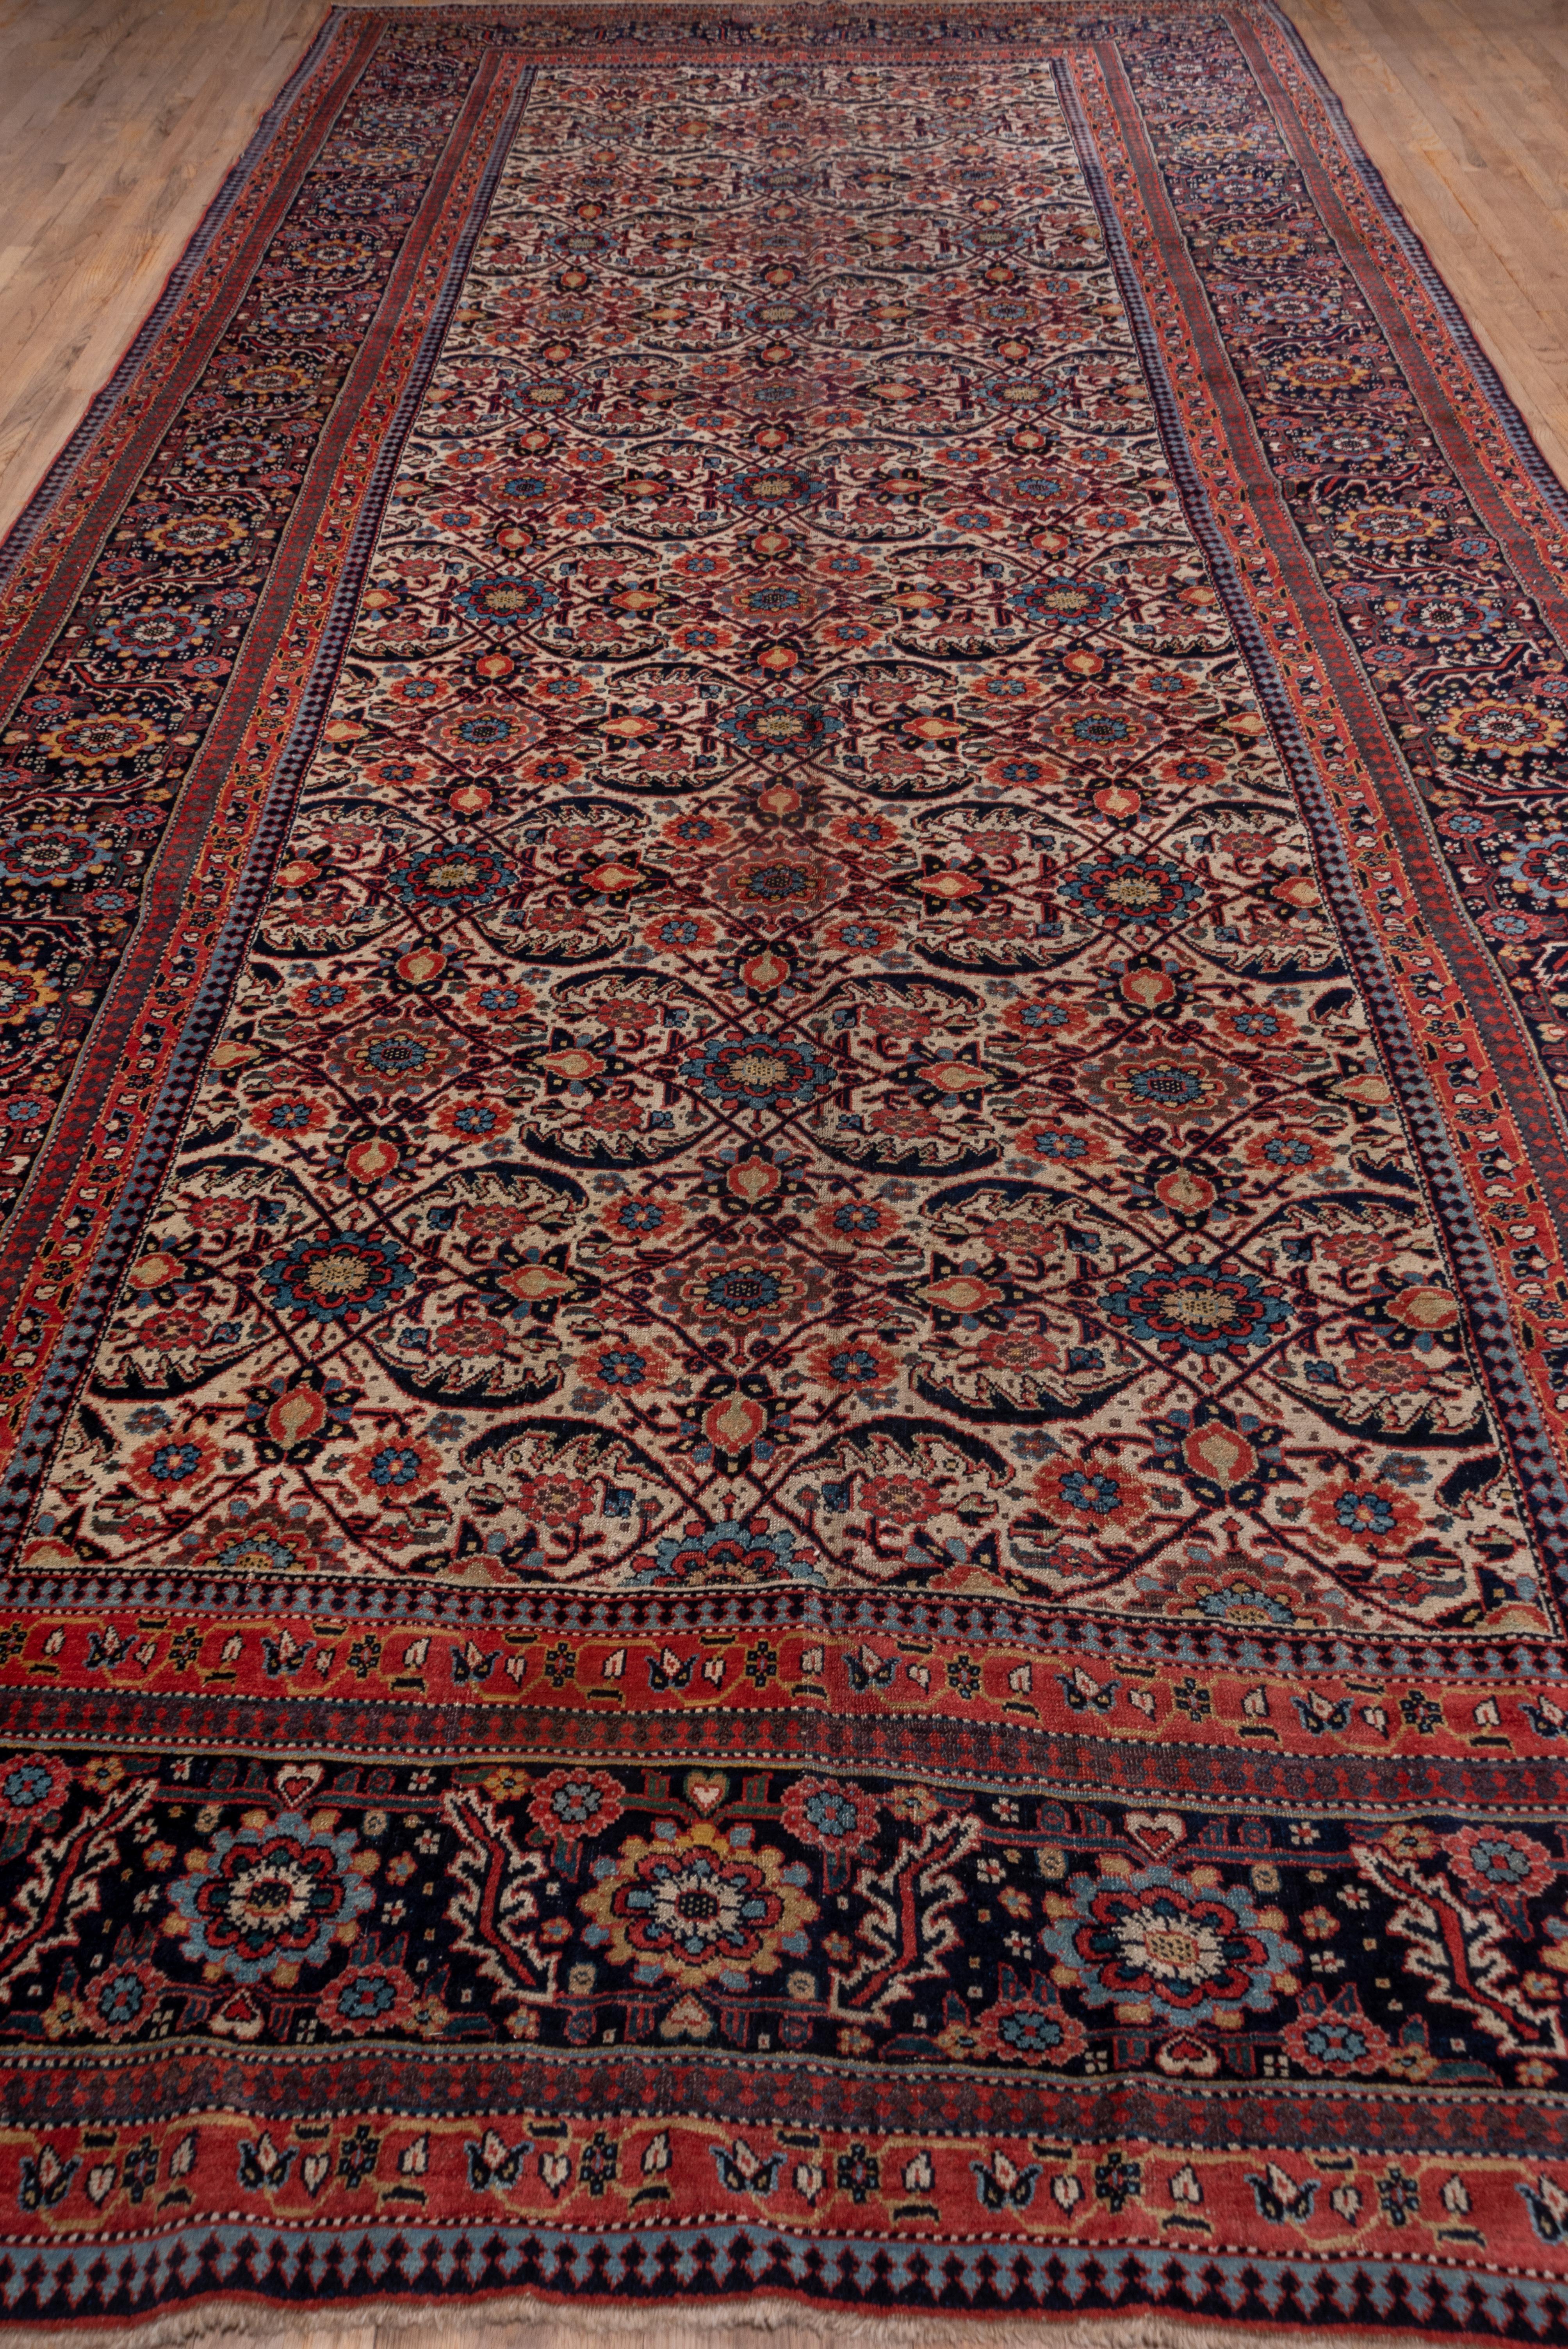 Hand-Knotted Persian Bidjar Gallery Carpet, Mid-19th Century, circa 1850s For Sale